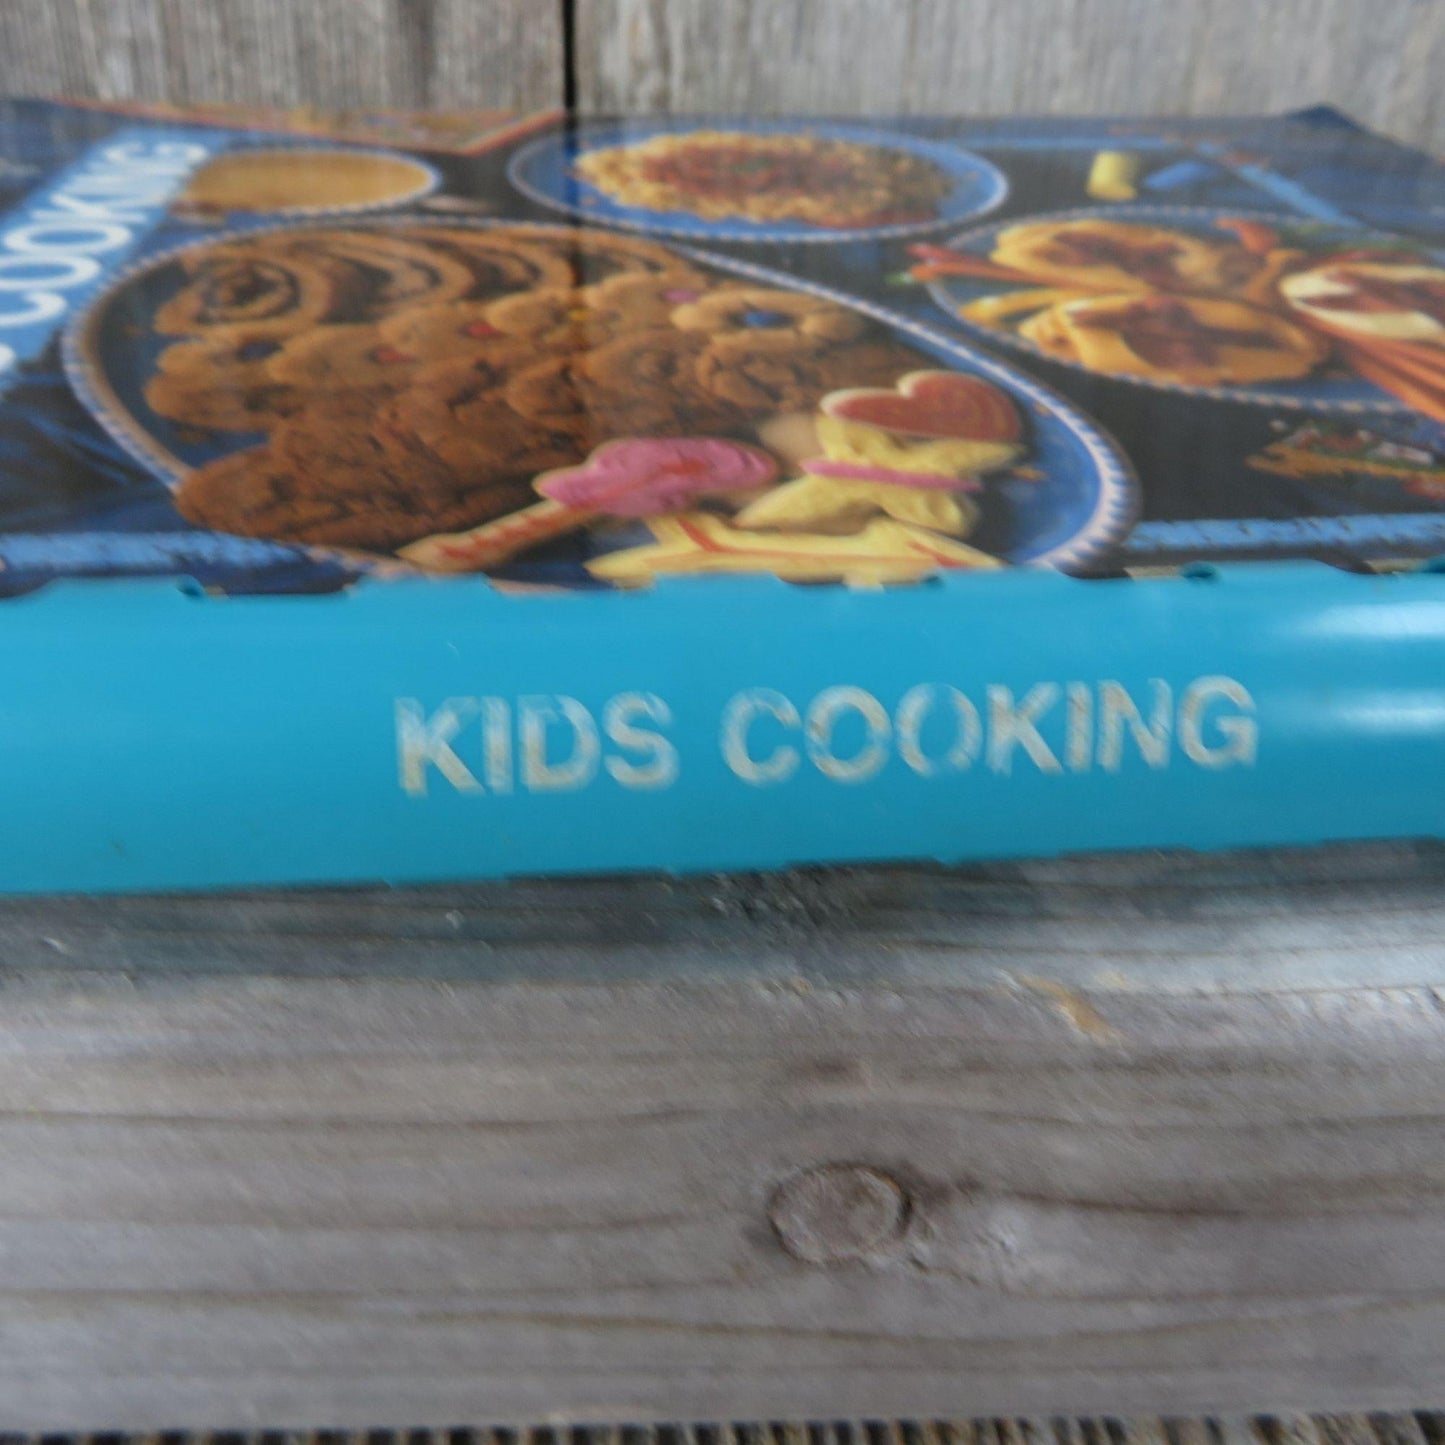 Vintage Kids Cooking Cookbook Sean Pare Company's Coming 1995 Cook Book Dessert Main Dishes Lunches - At Grandma's Table